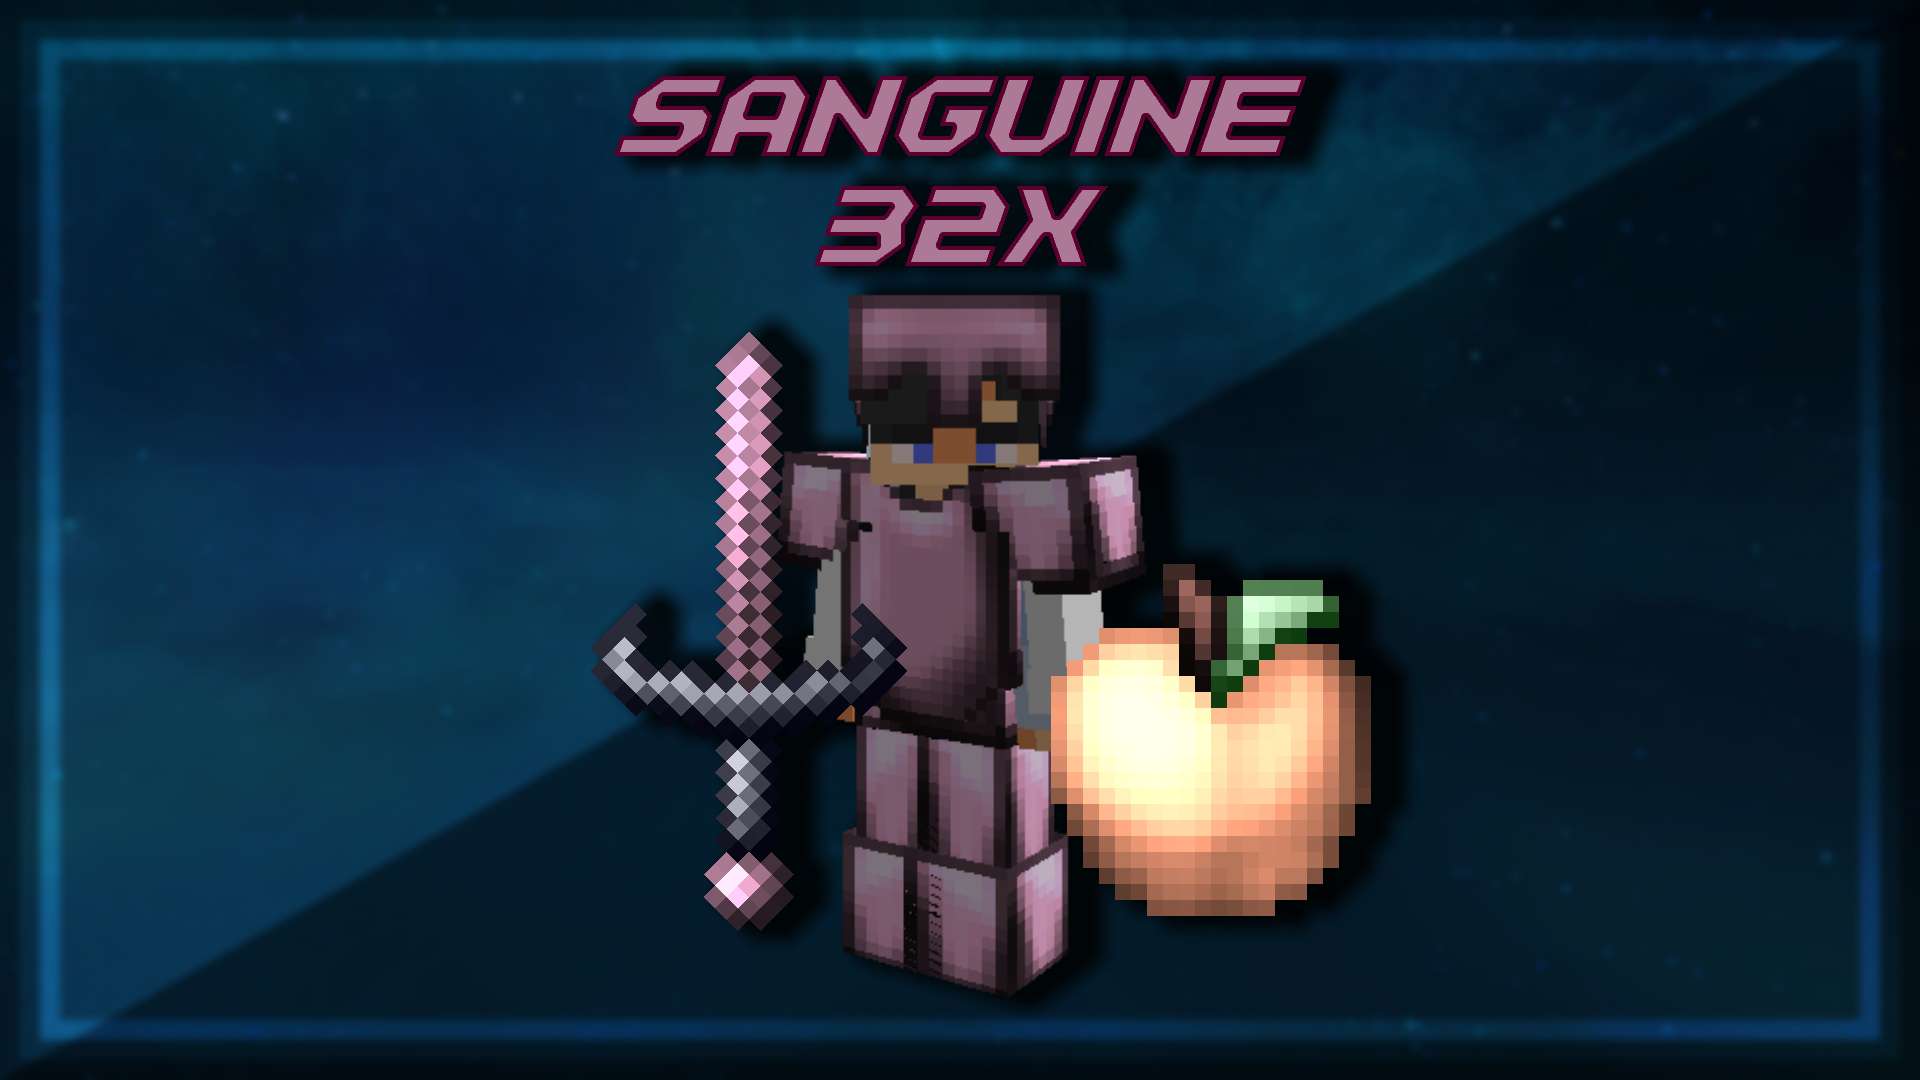 Sanguine  32x by Toyok on PvPRP